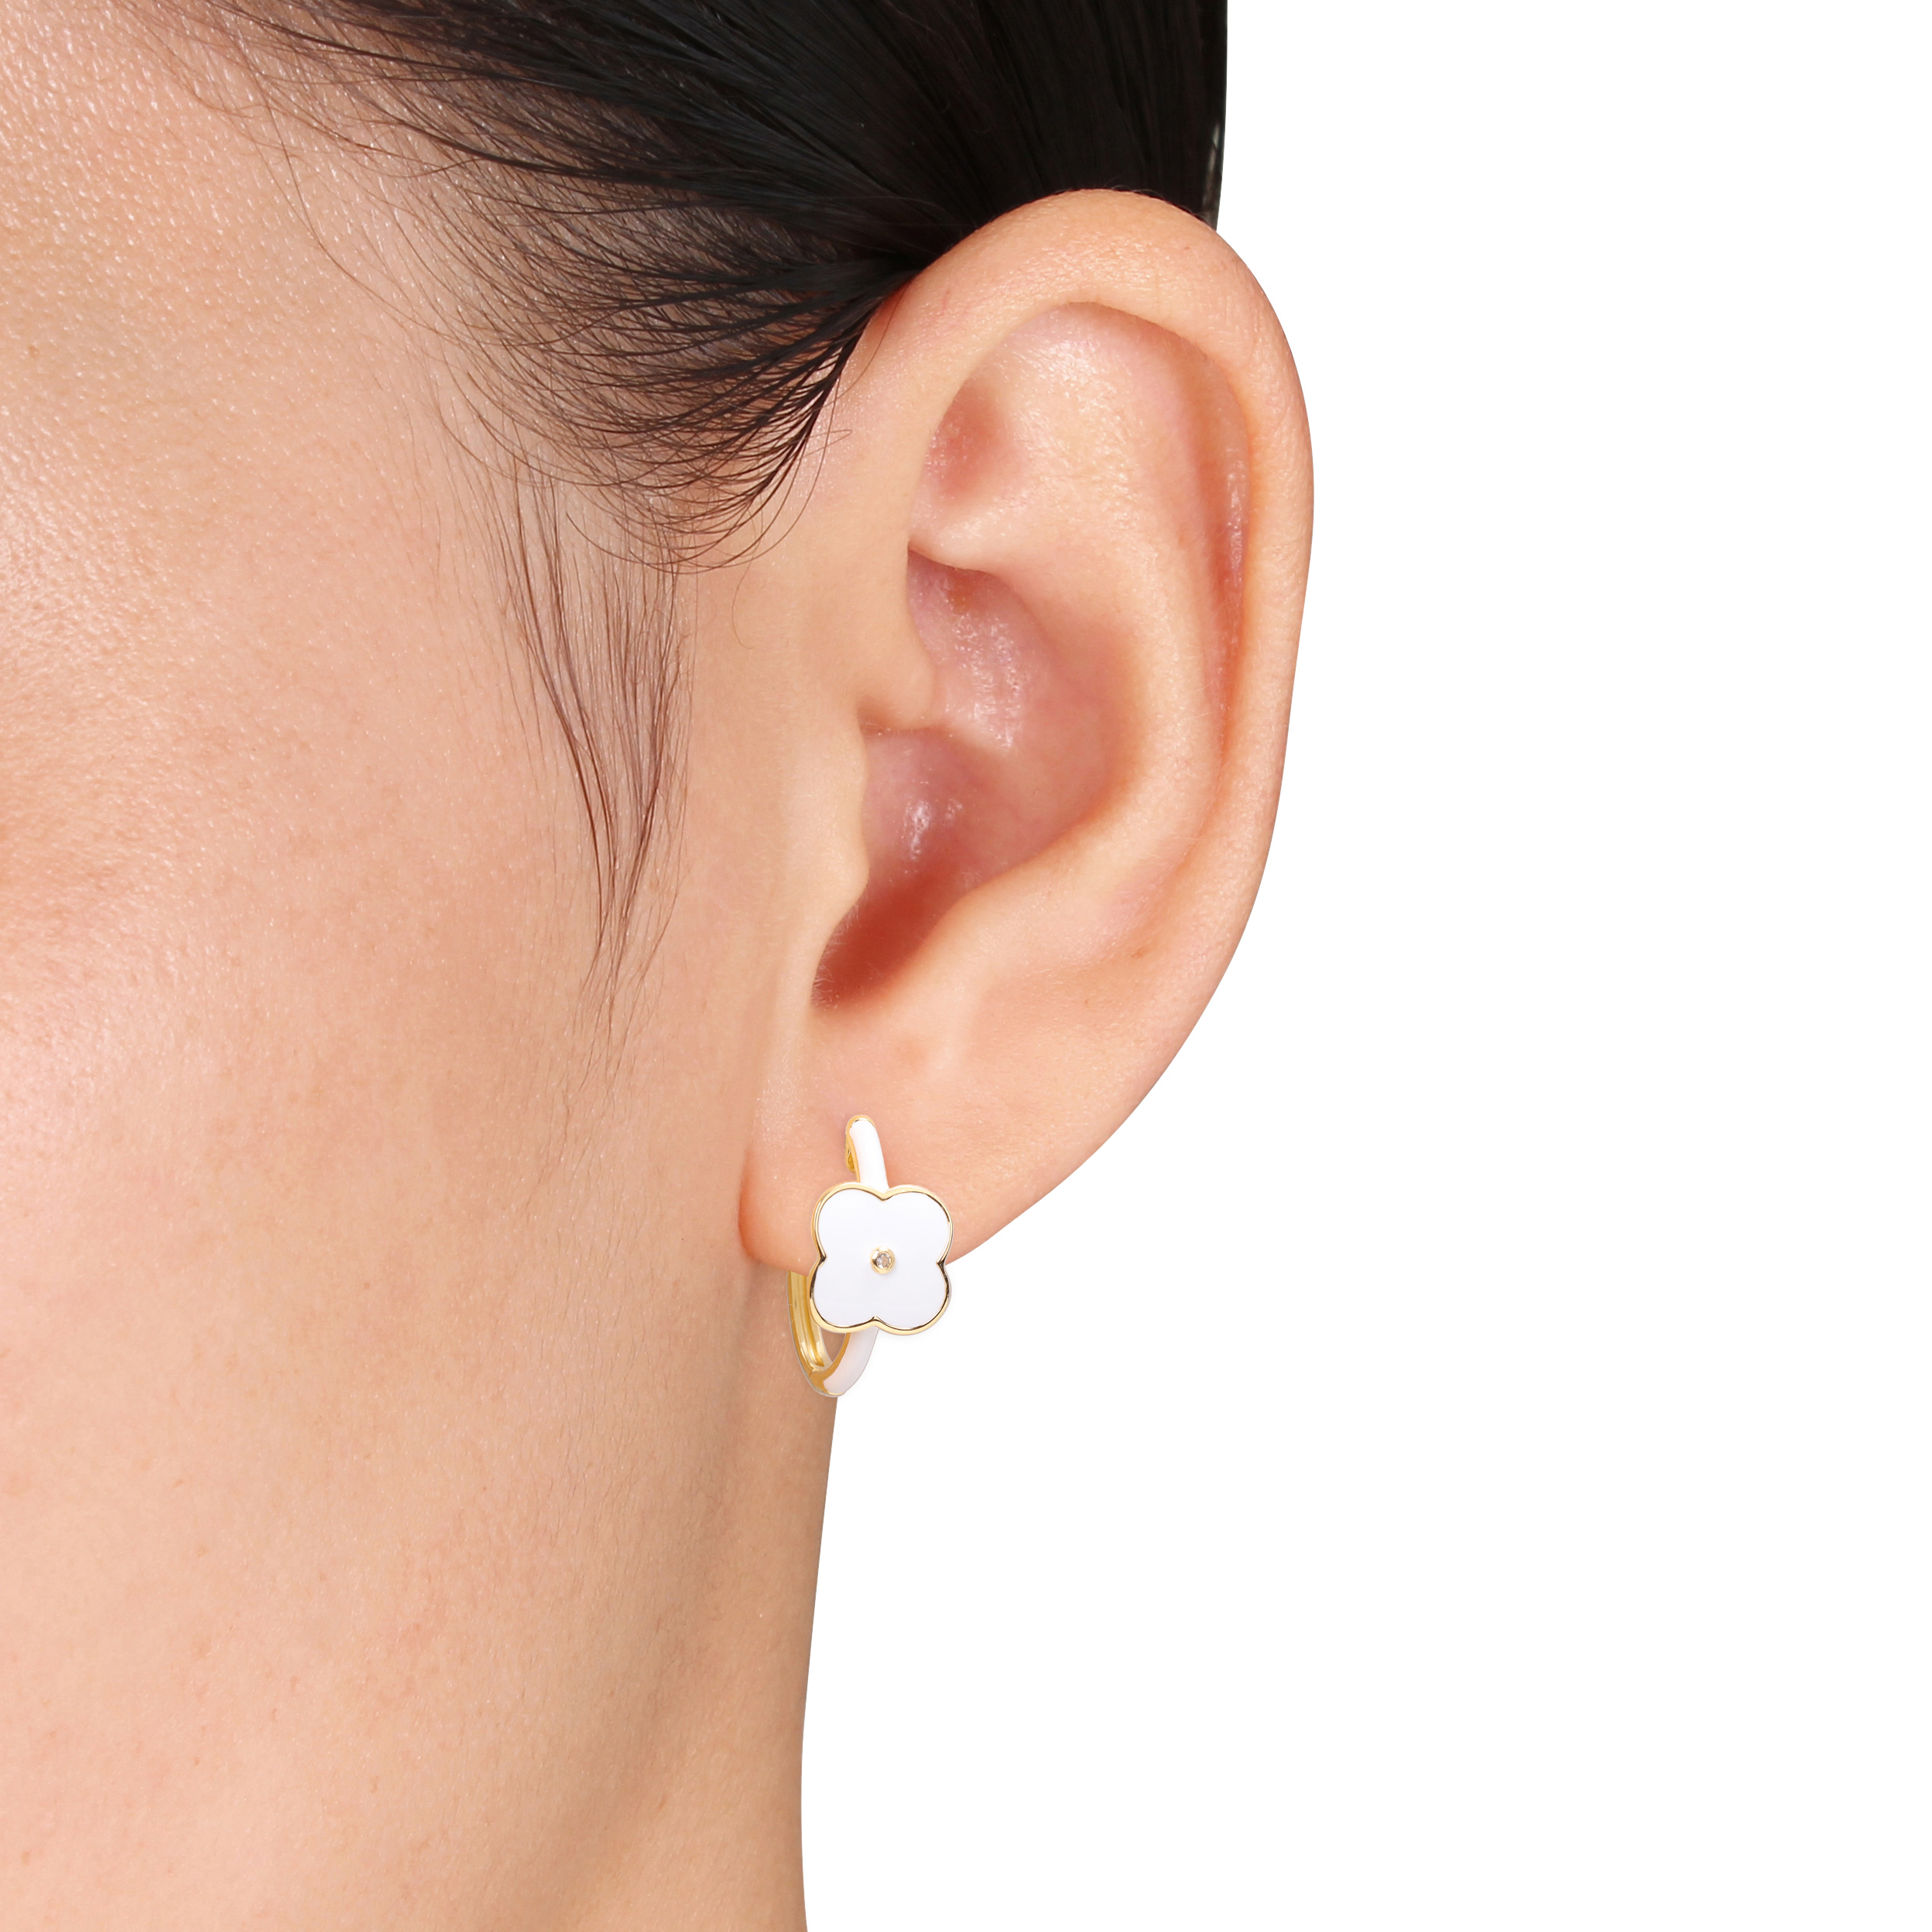 Created White Sapphire Floral White Enamel Hoop Earrings in Yellow Plated Sterling Silver